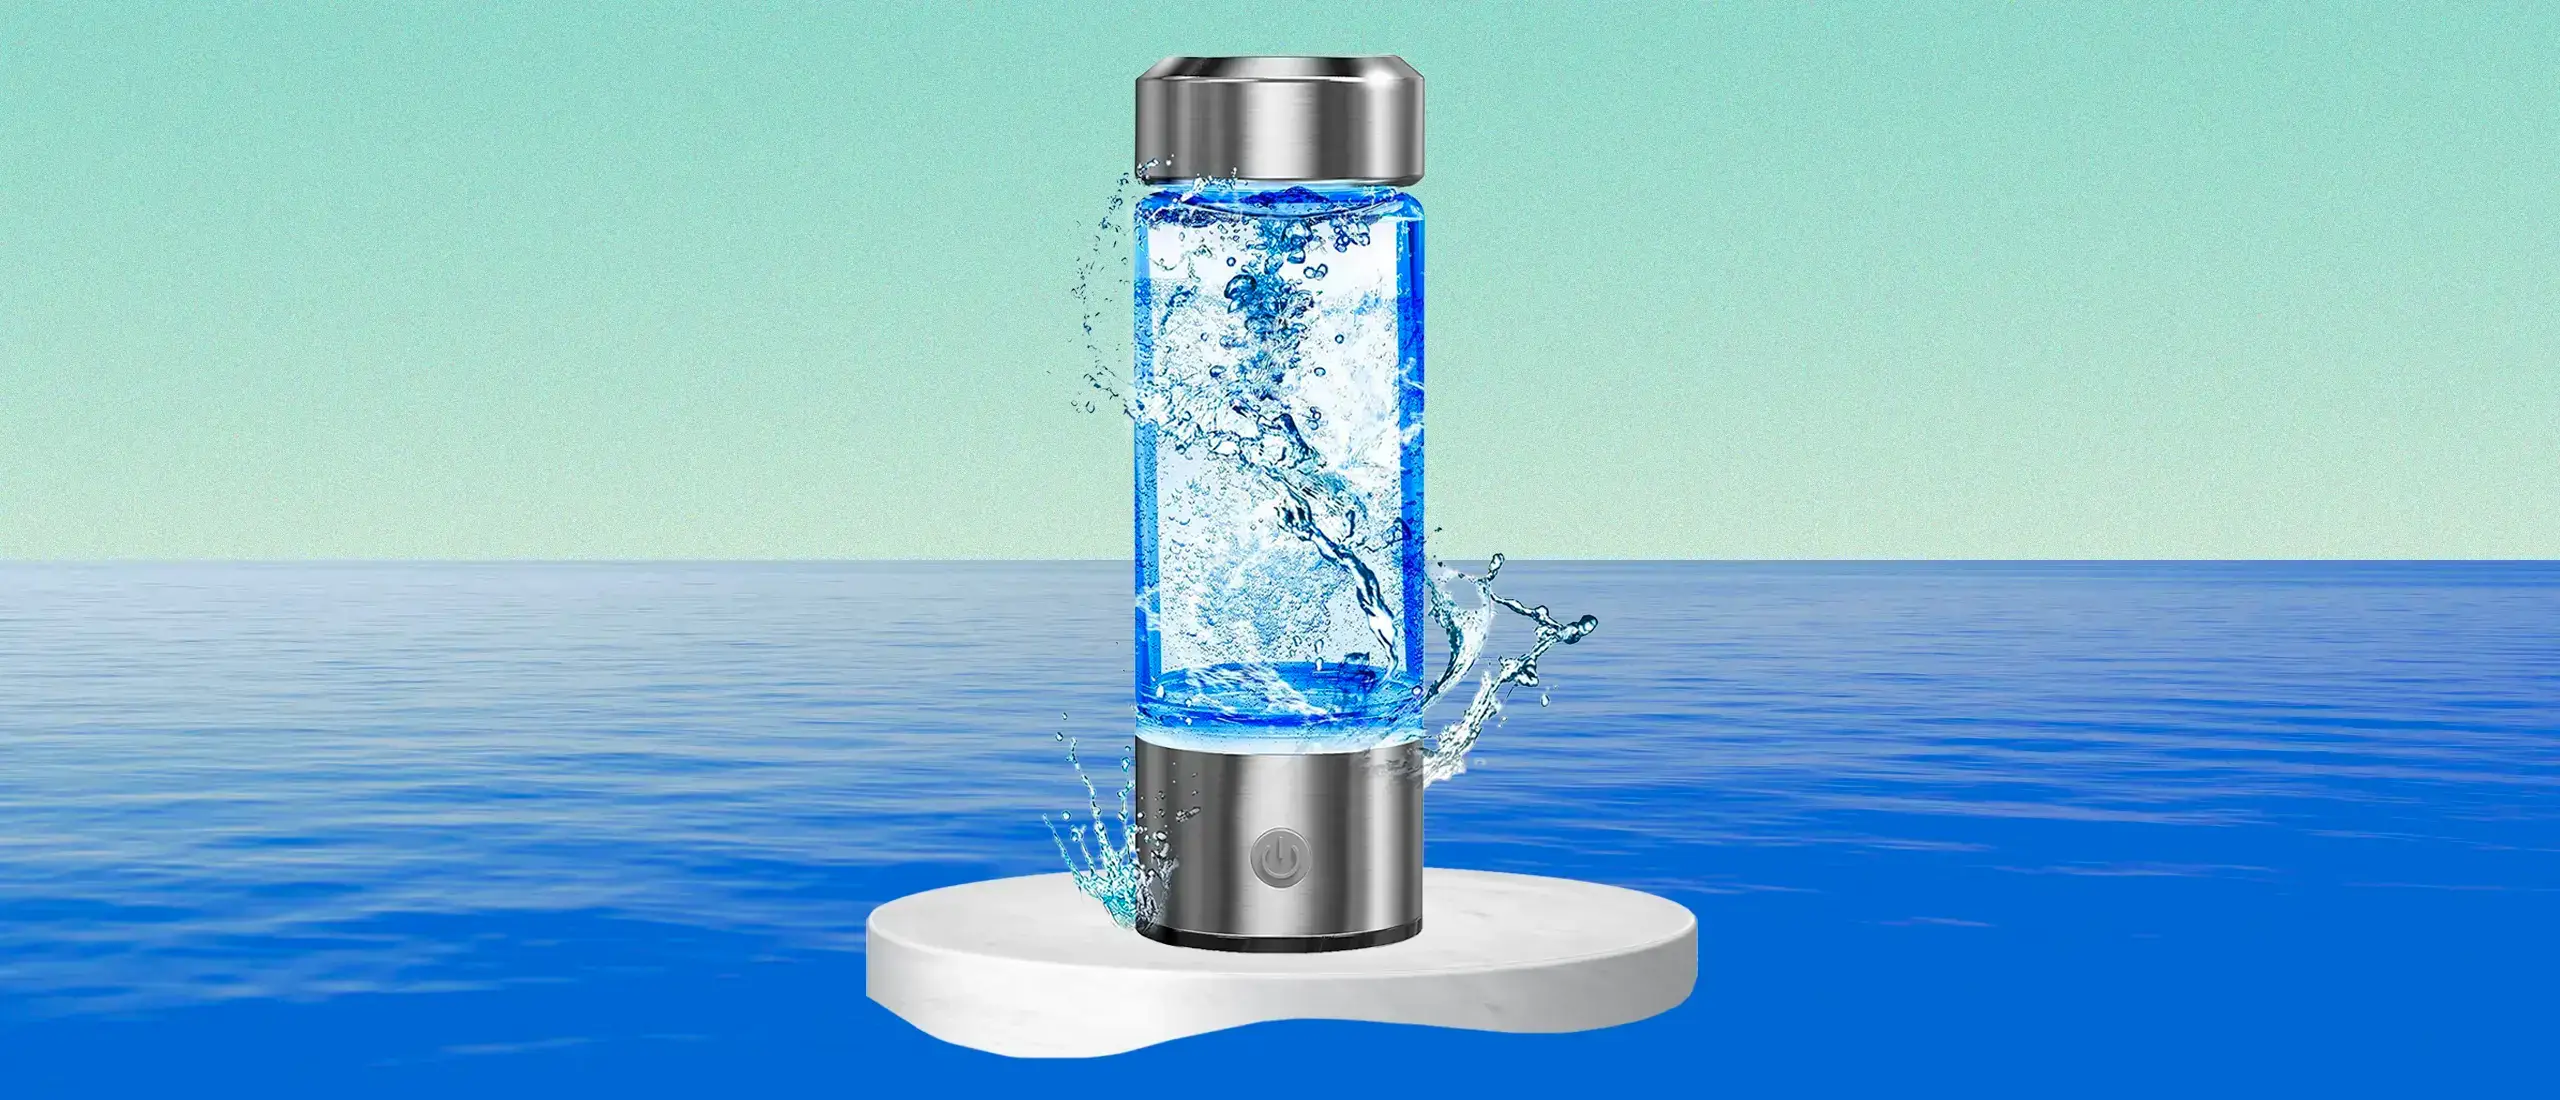 hydrogen water bottle on a pedestal surrounded by water